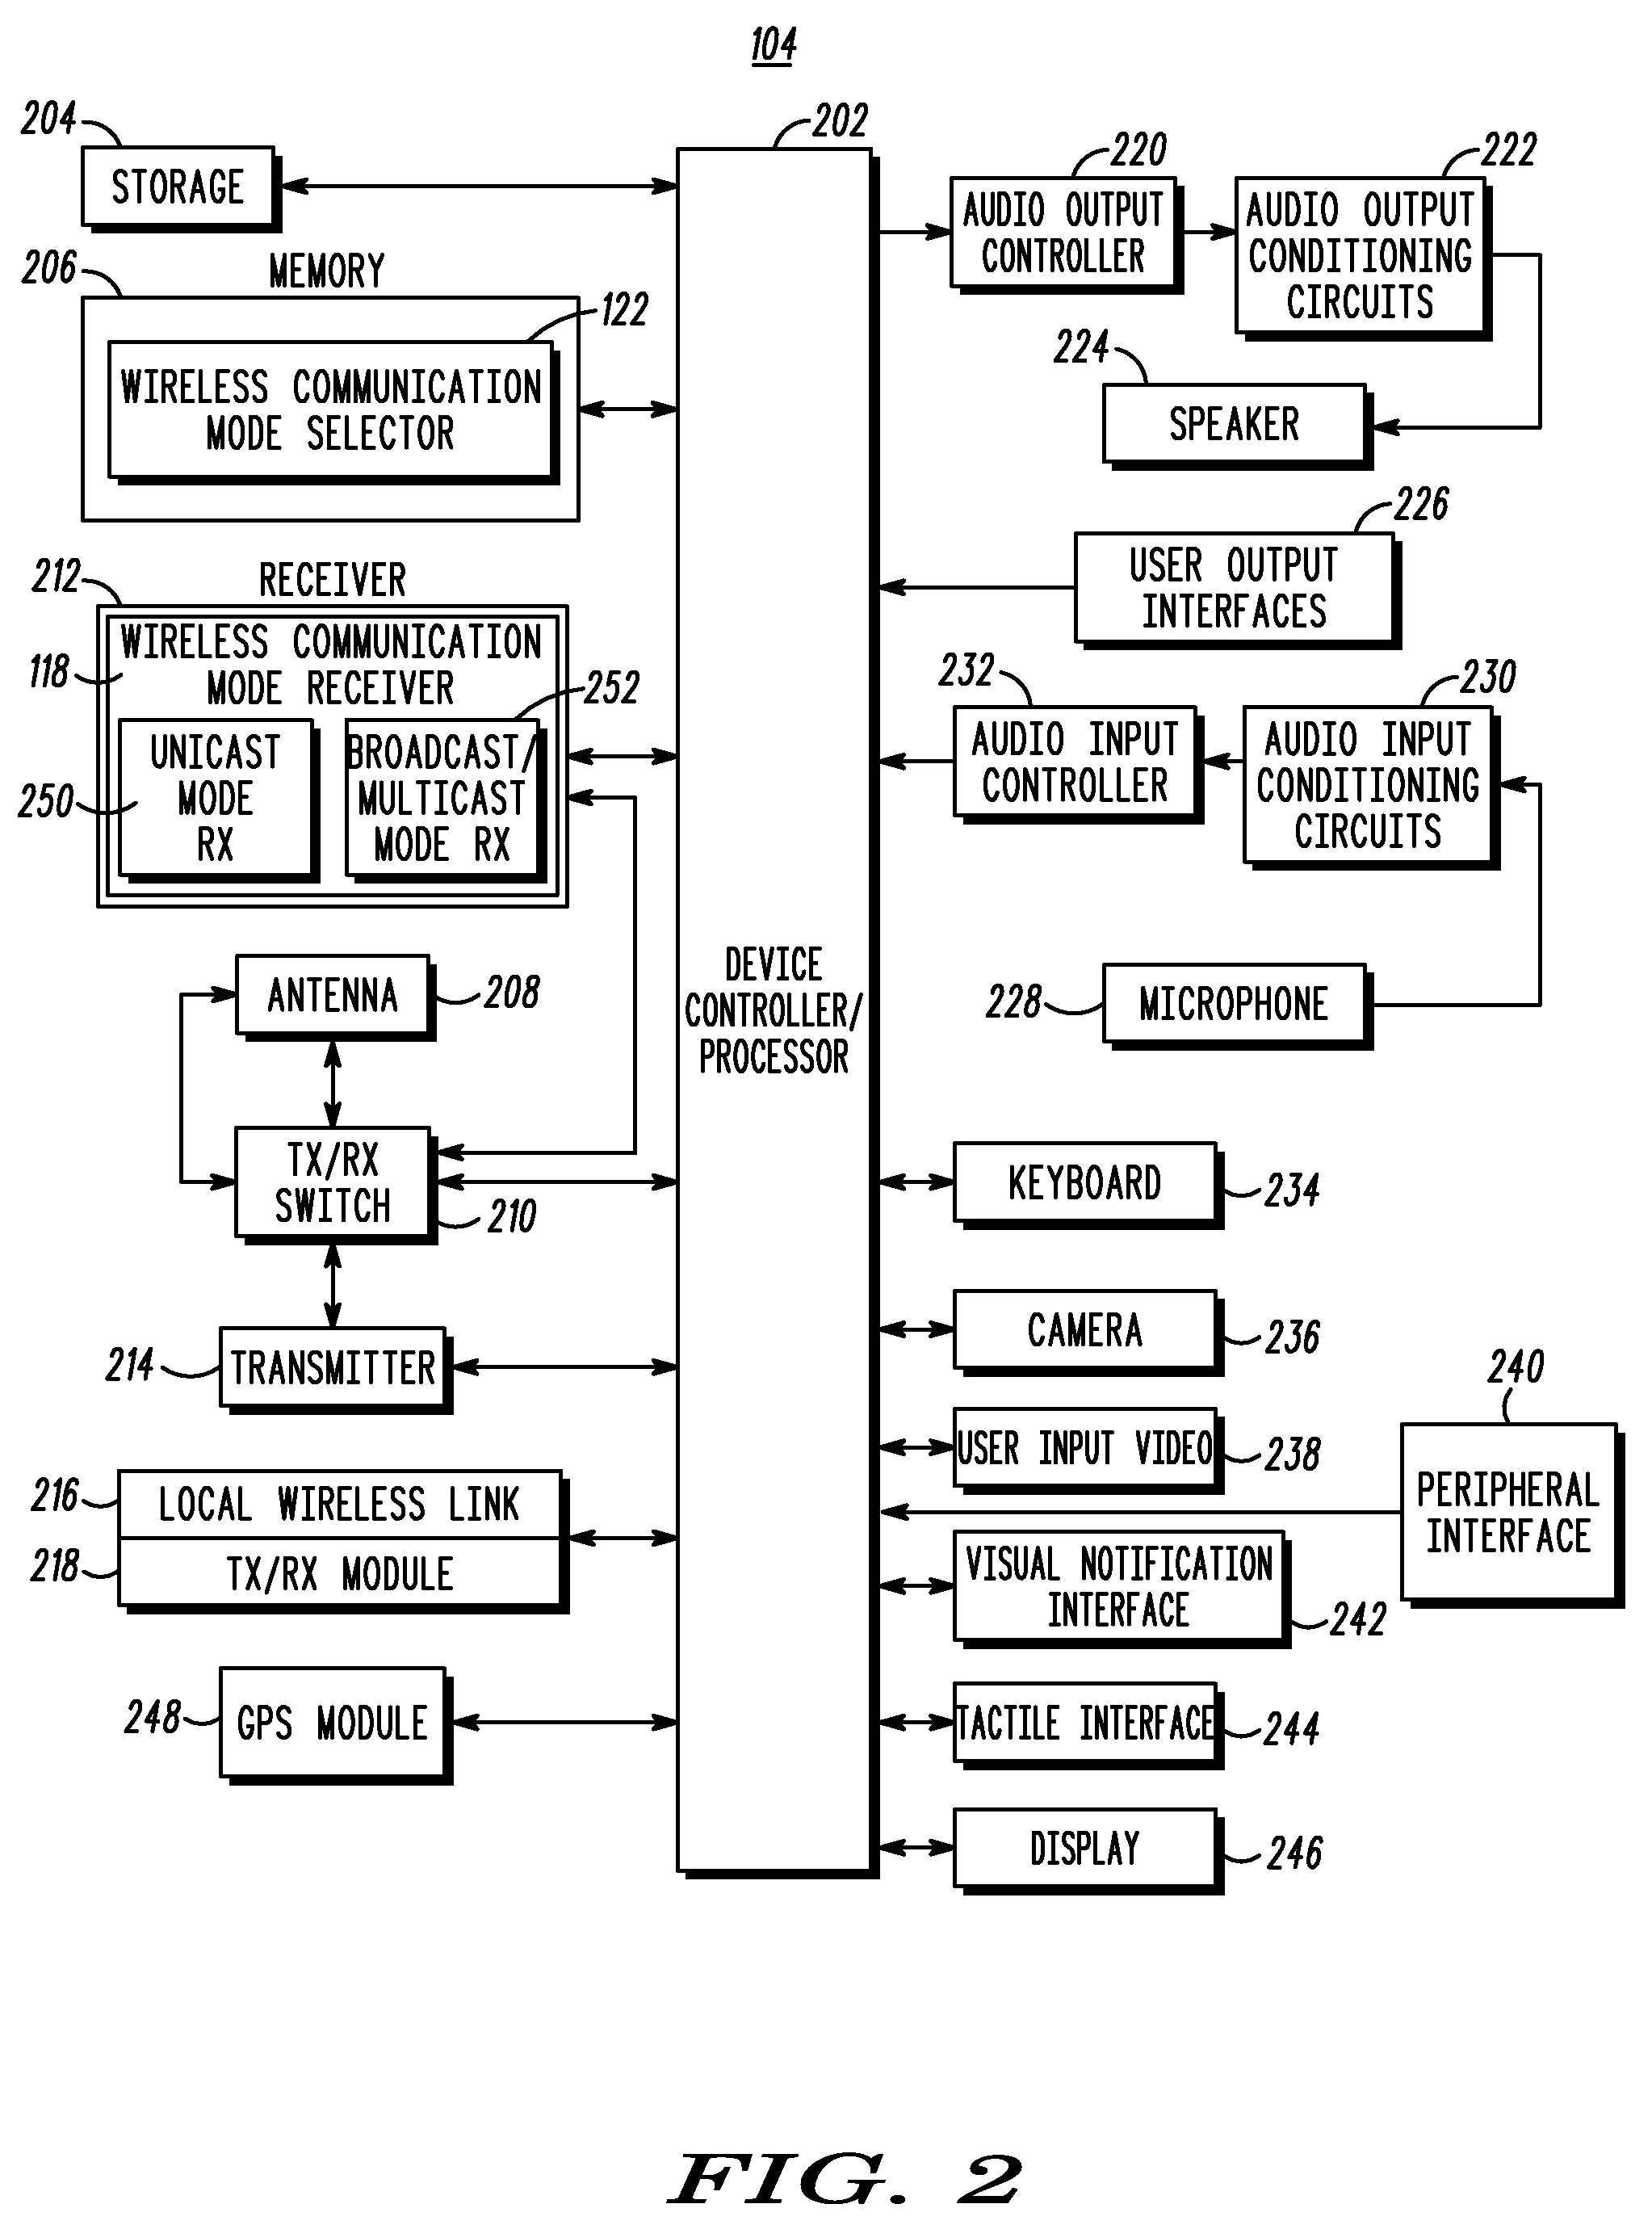 Dynamic selection of wireless information communication modes for a wireless communication device